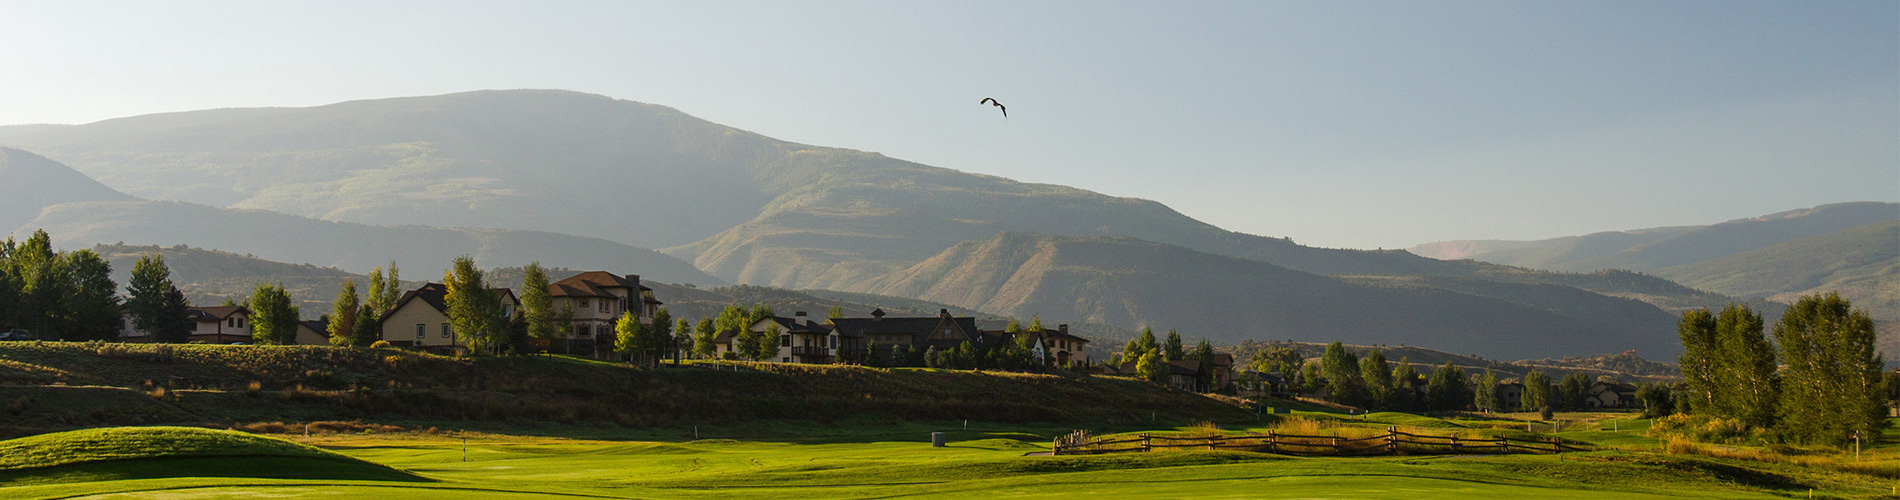 pano view of golf course with mountains in the background